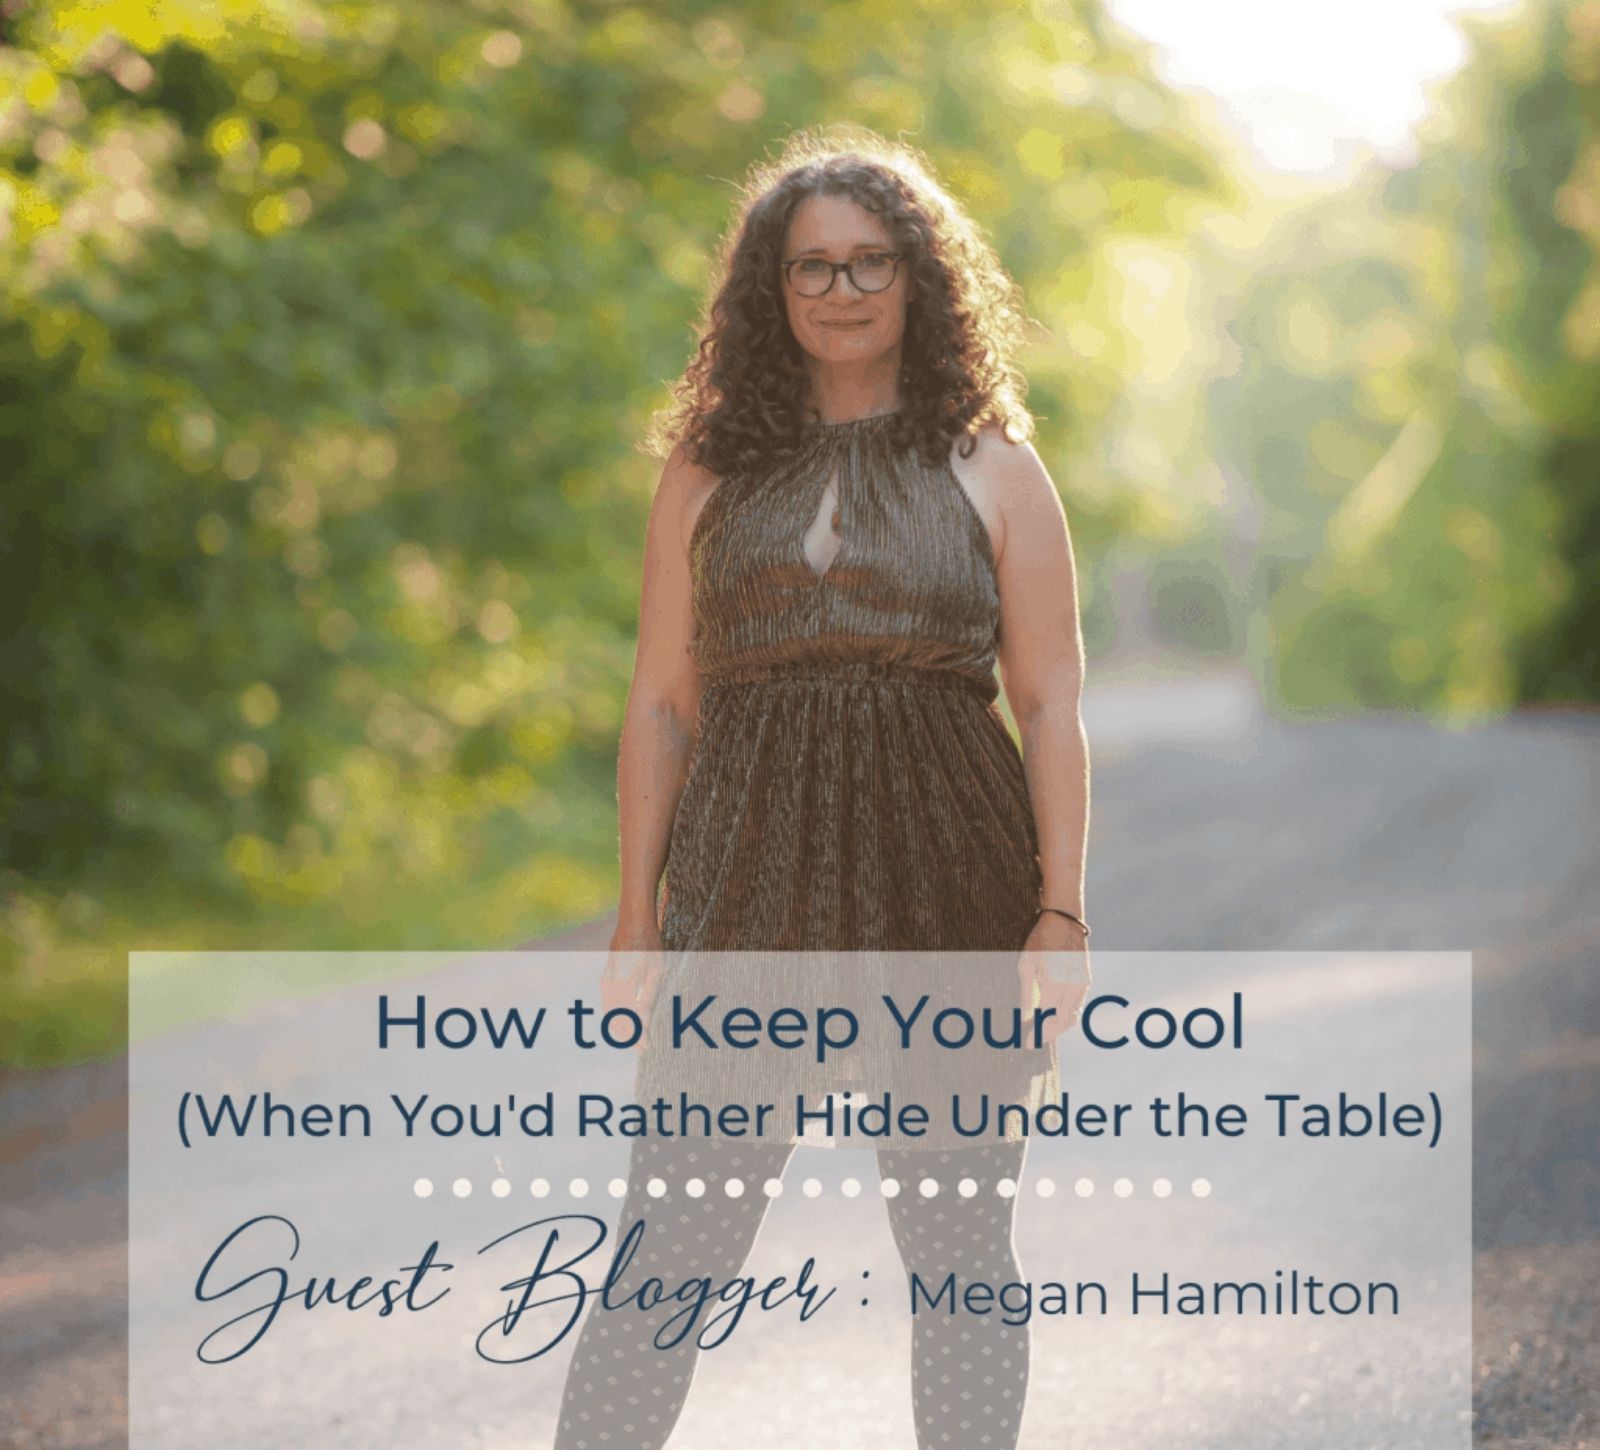 Kitchen Table CEOs Blog - Megan Hamilton - guest blogger - breathwork - mindfulness - how to keep your cool - entrpreneur mindset - megan hamilton posing for camera on side of road surrounded by trees